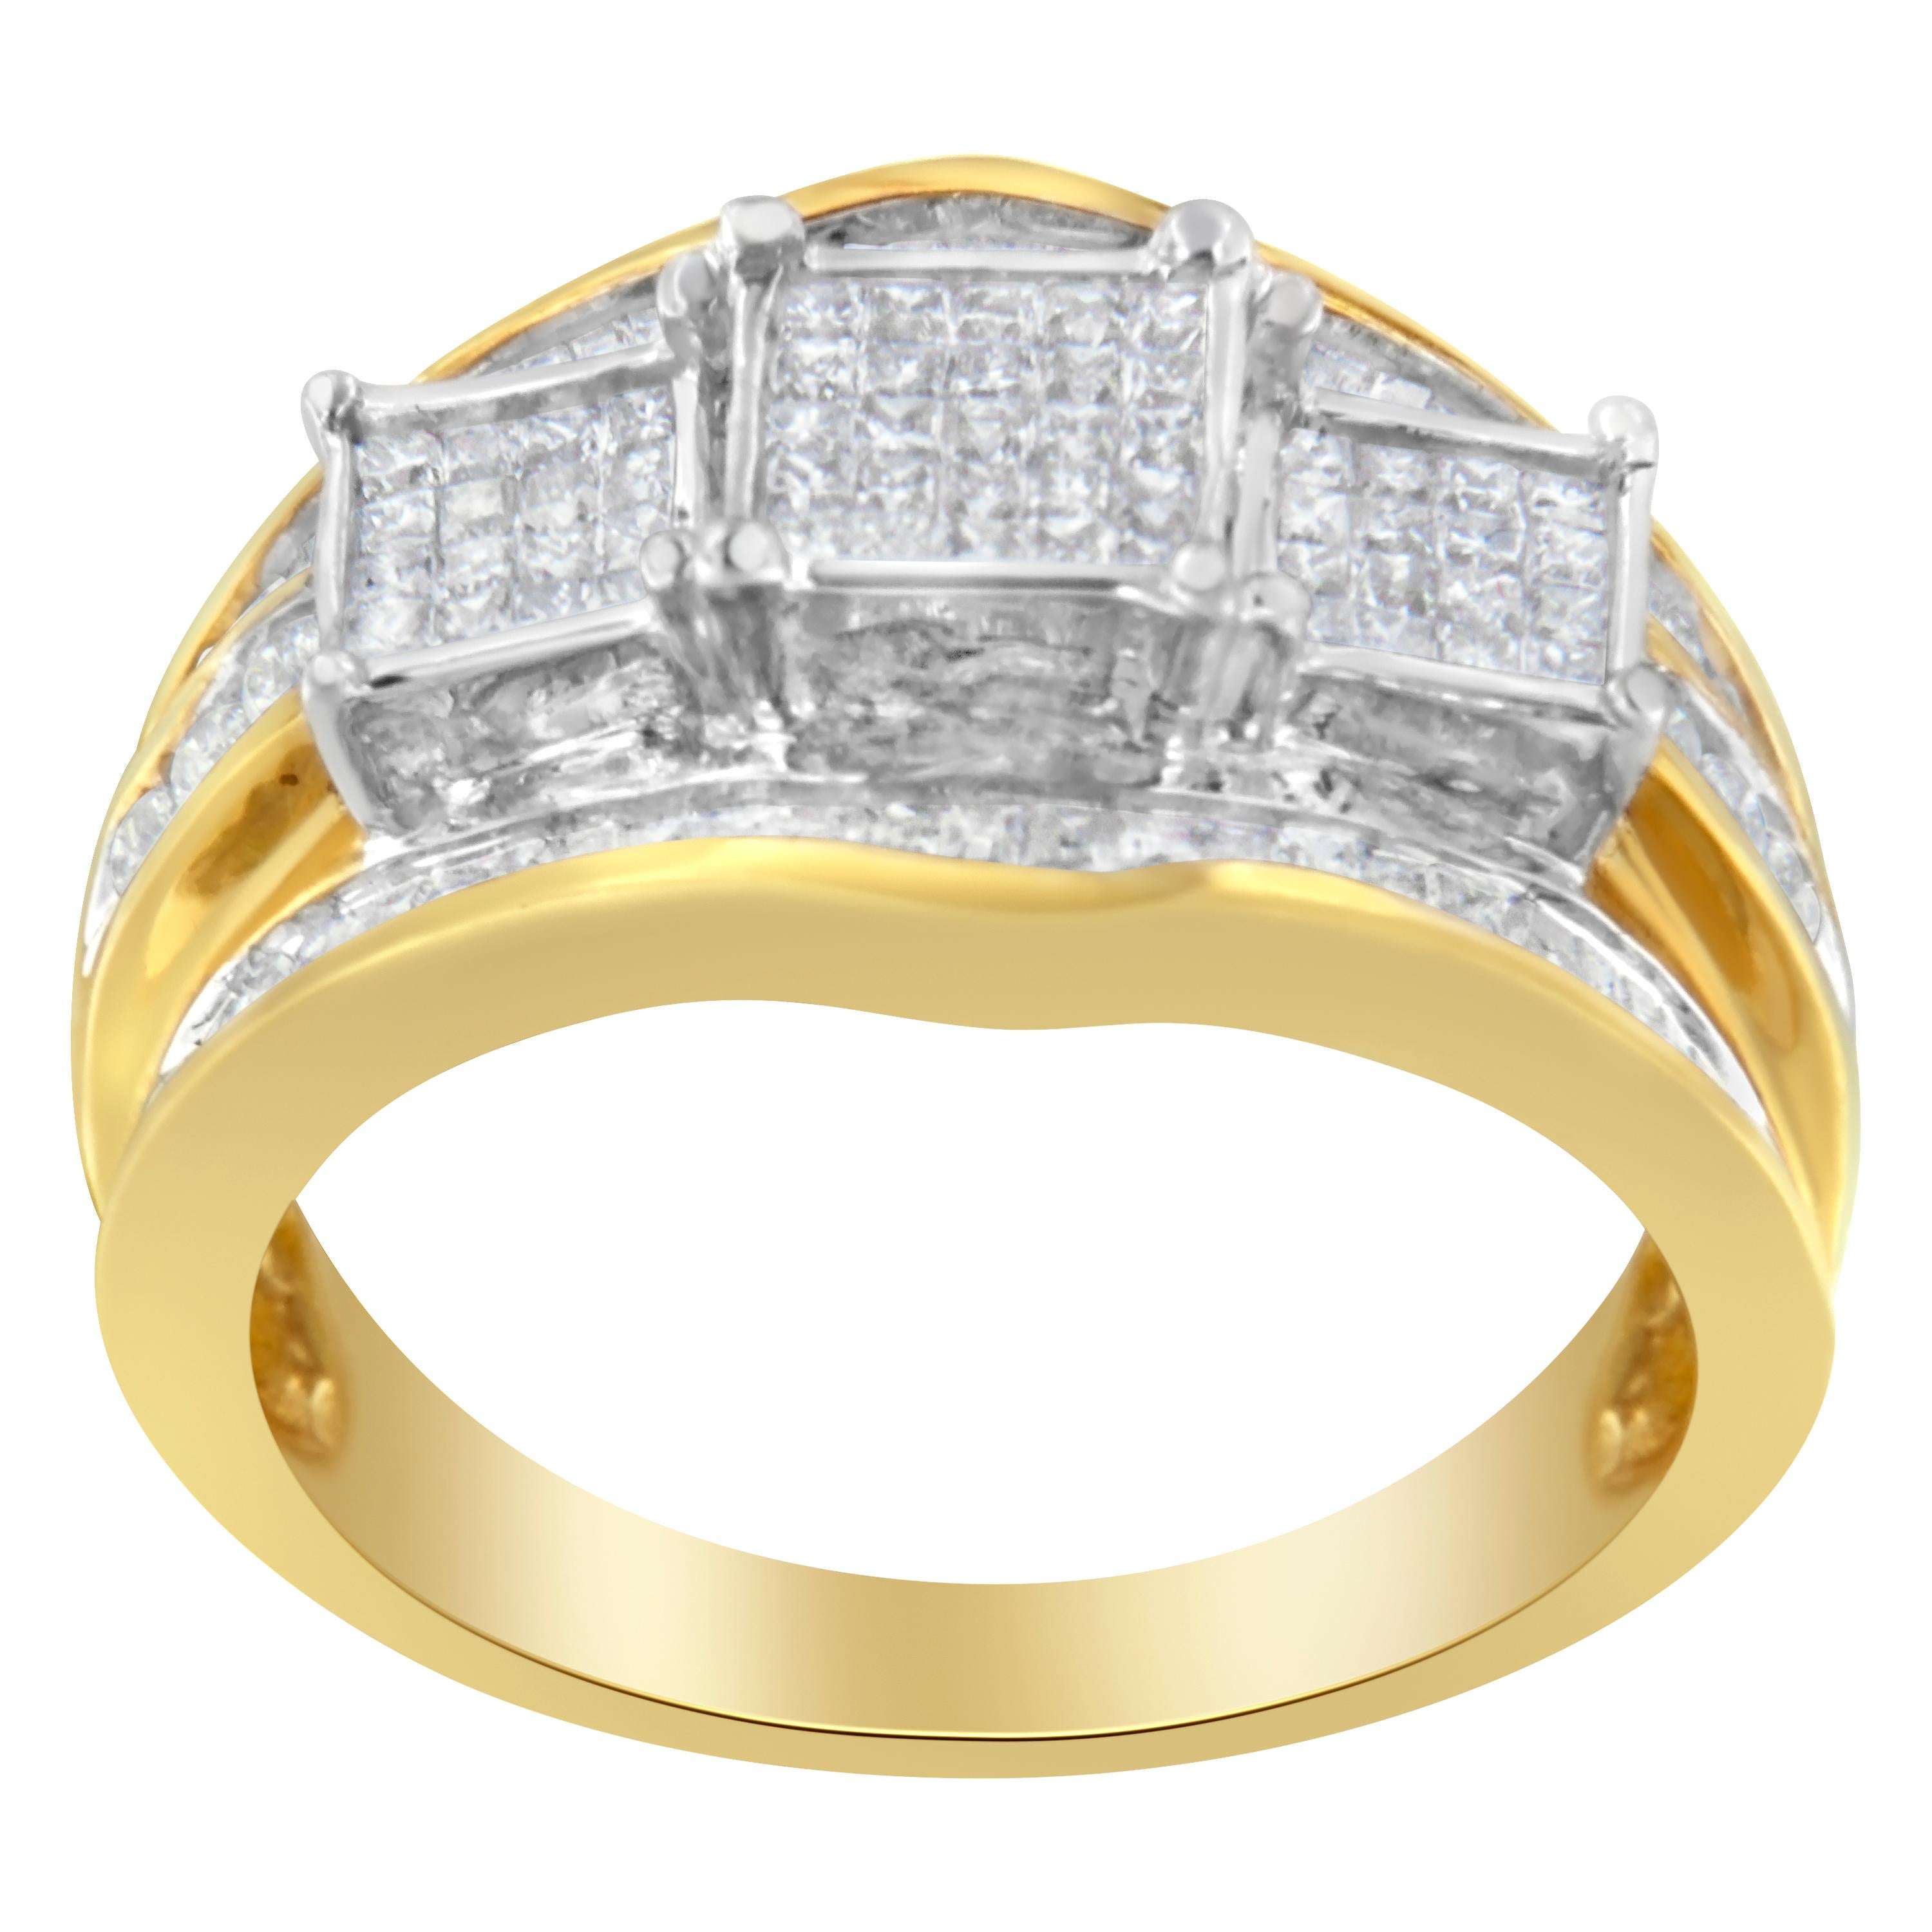 A unique gold and diamond cluster ring. This ring is made with 6 round, 53 baguette, and 57 princess-cut diamonds, weighing a total of 1 ct. The diamonds are set in lustrous 14k two-toned gold. 

'Video Available Upon Request.'

Product